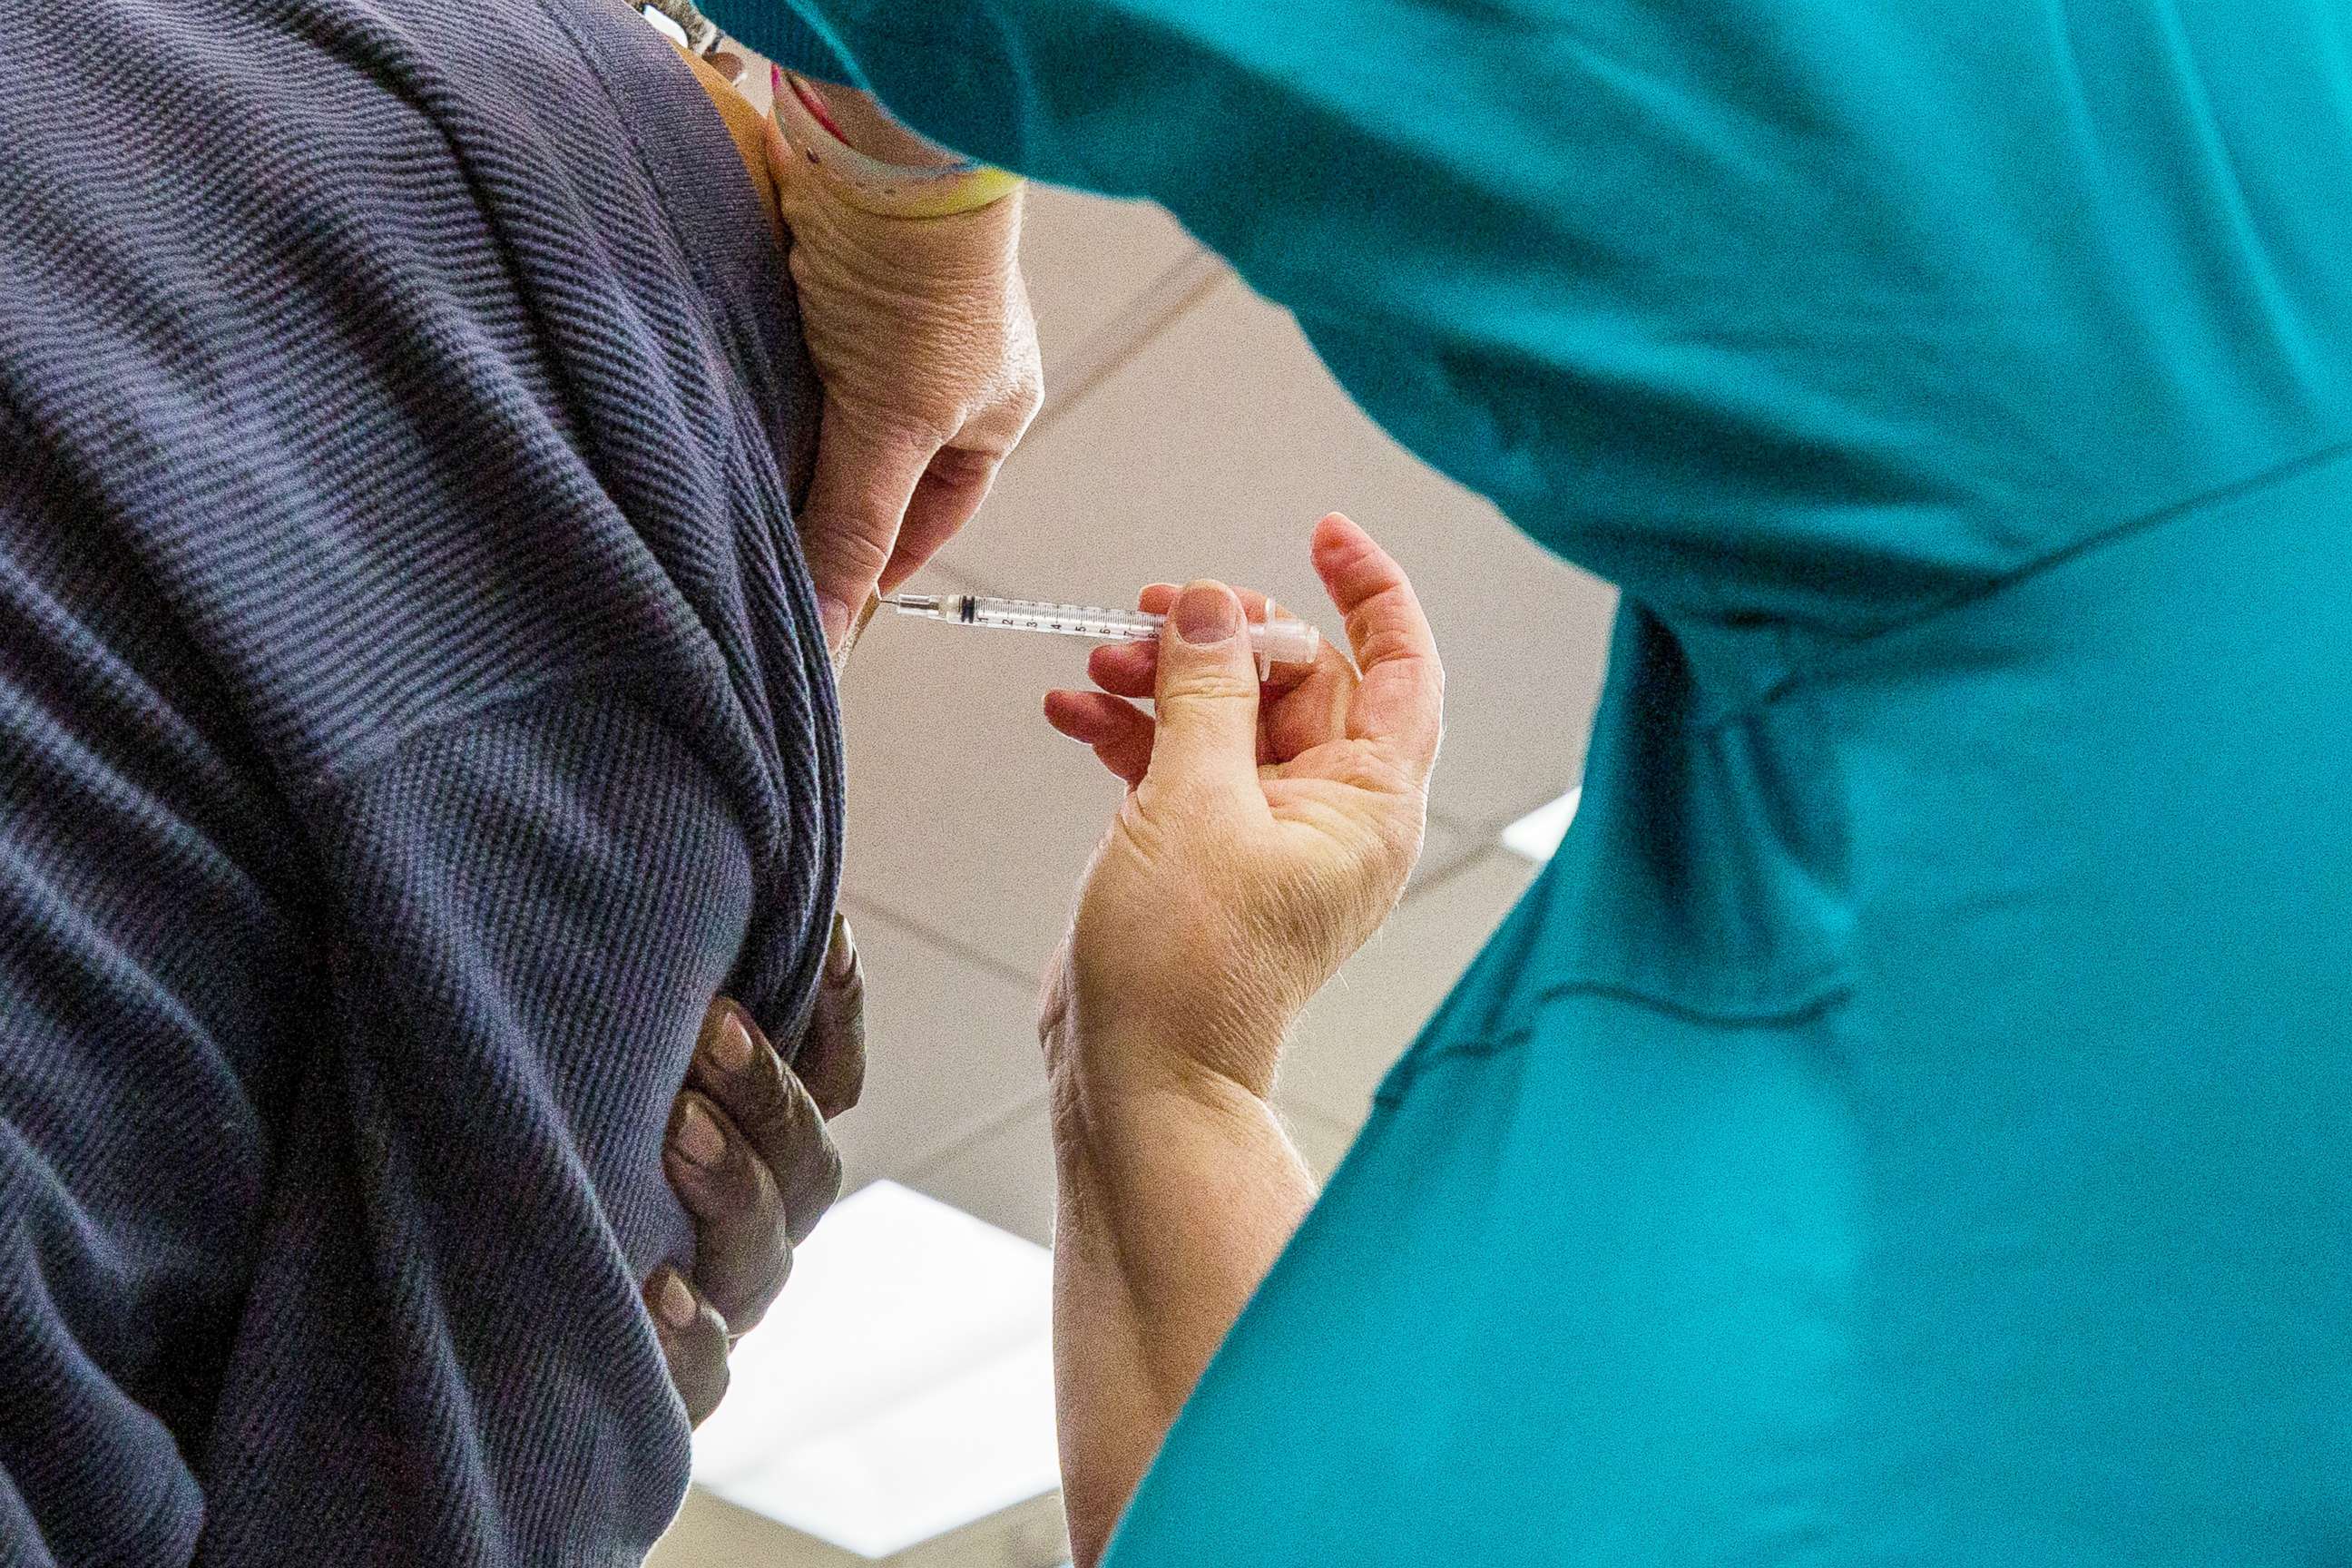 PHOTO: A patient receives the Pfizer-BioNTech vaccine at the McLeod Health Clarendon hospital in Manning, S.C., Feb. 17, 2021.